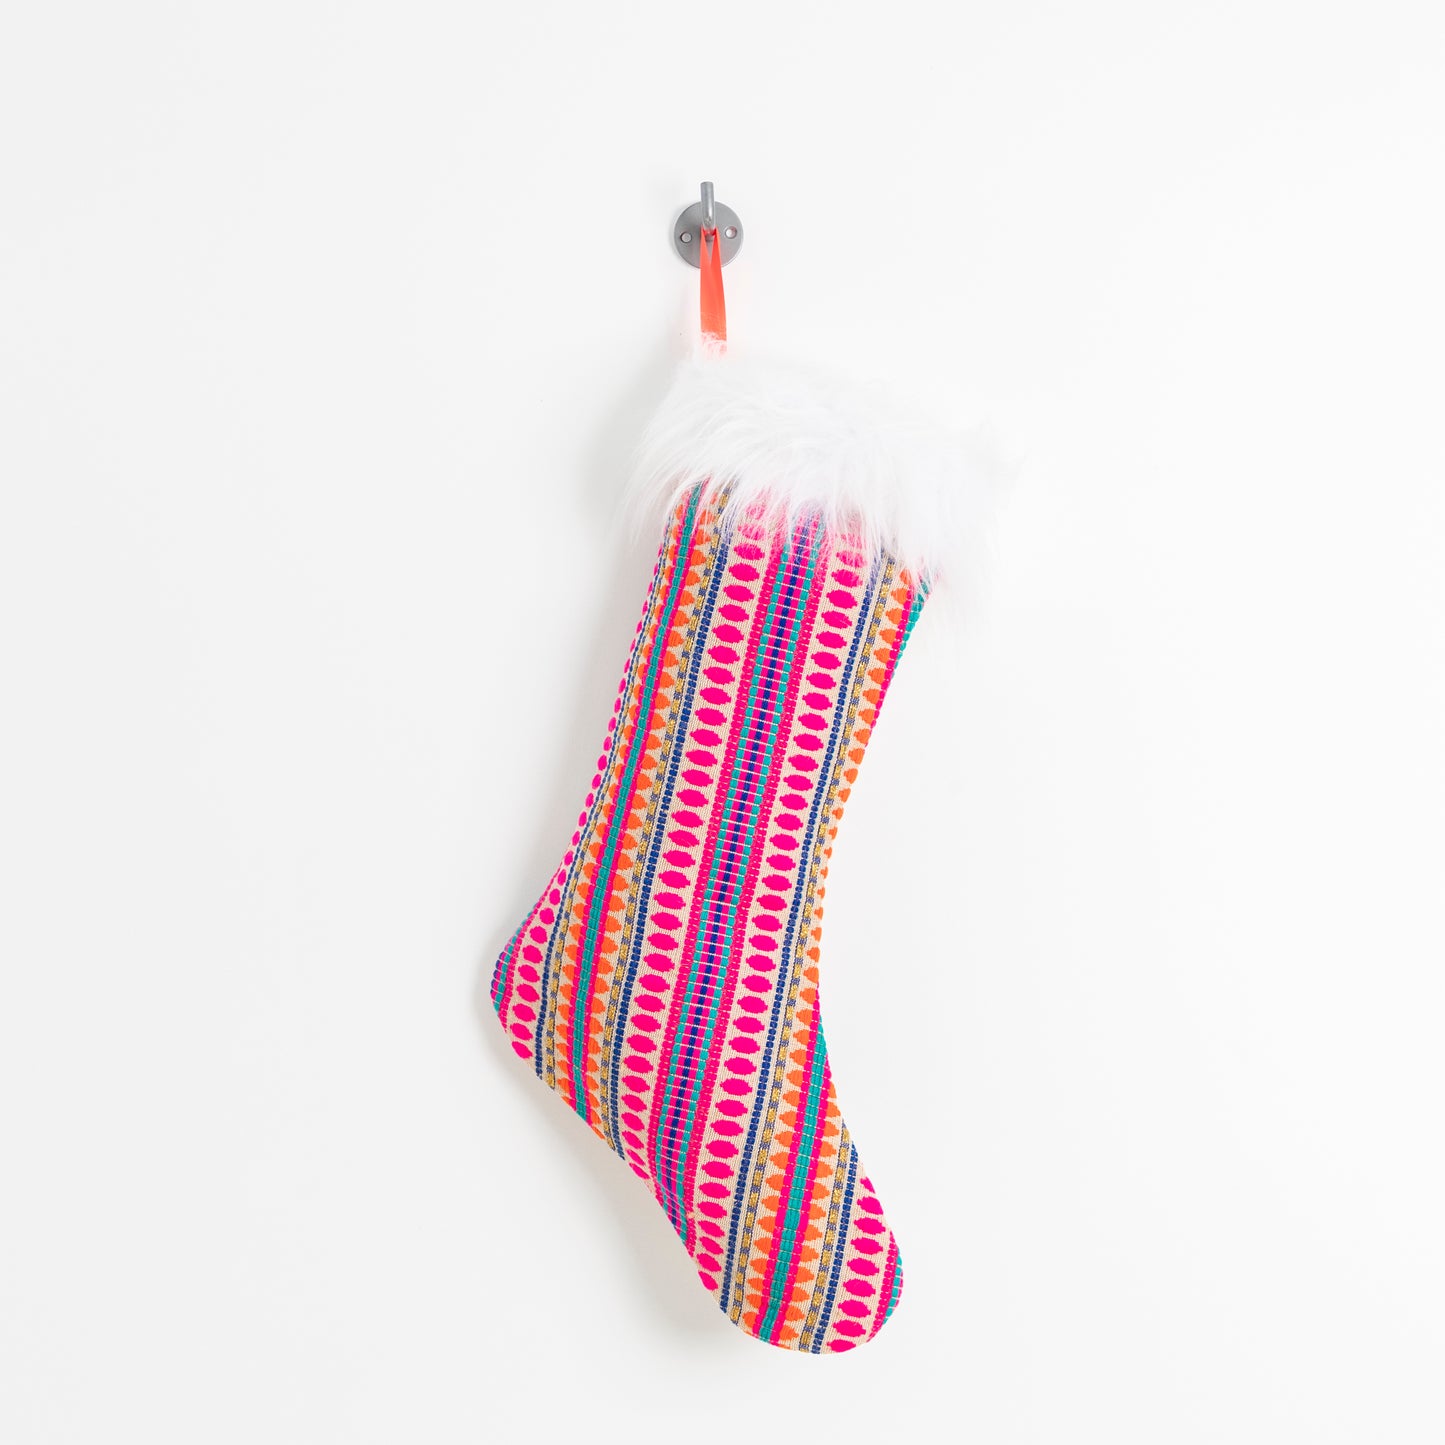 beautiful woven pink fabric stocking with faux fur trim hanging by a bright orange ribbon.